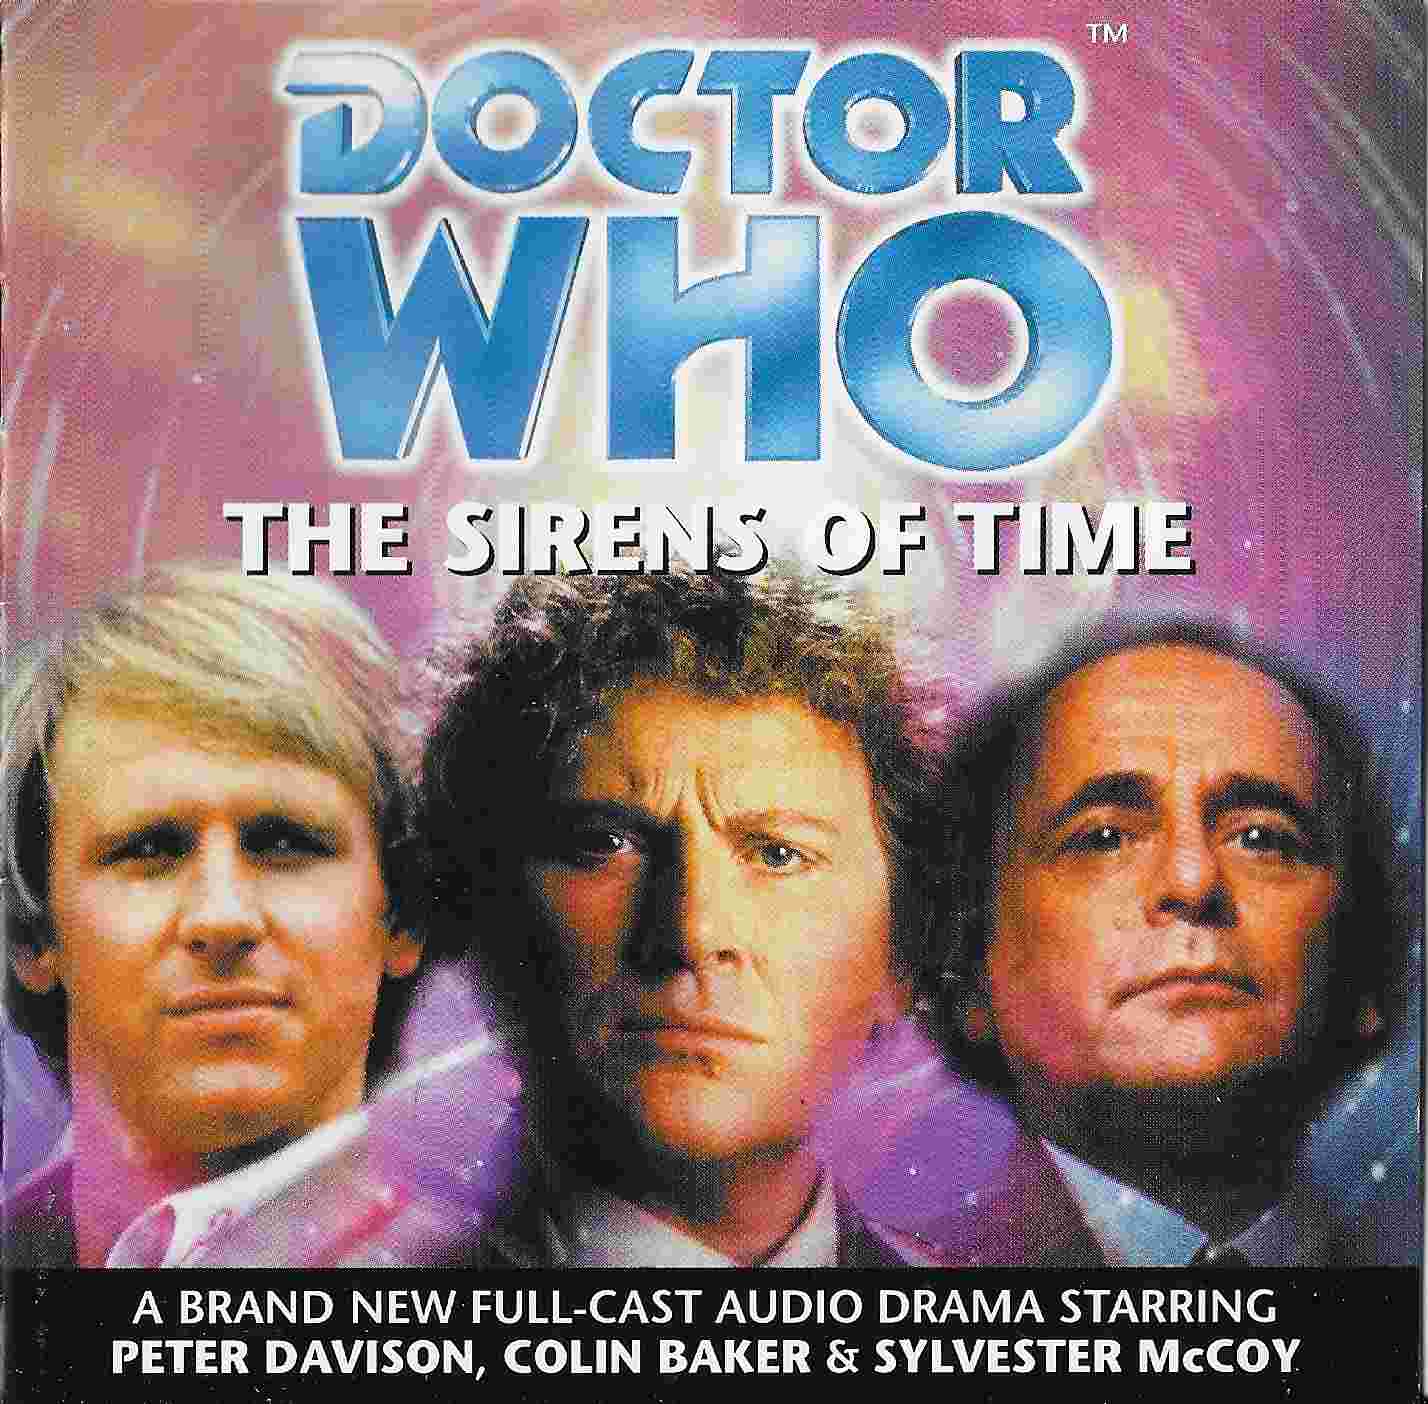 Picture of BFPDWCD 7Z Doctor who - Sirens of time  by artist Nicholas Briggs from the BBC cds - Records and Tapes library